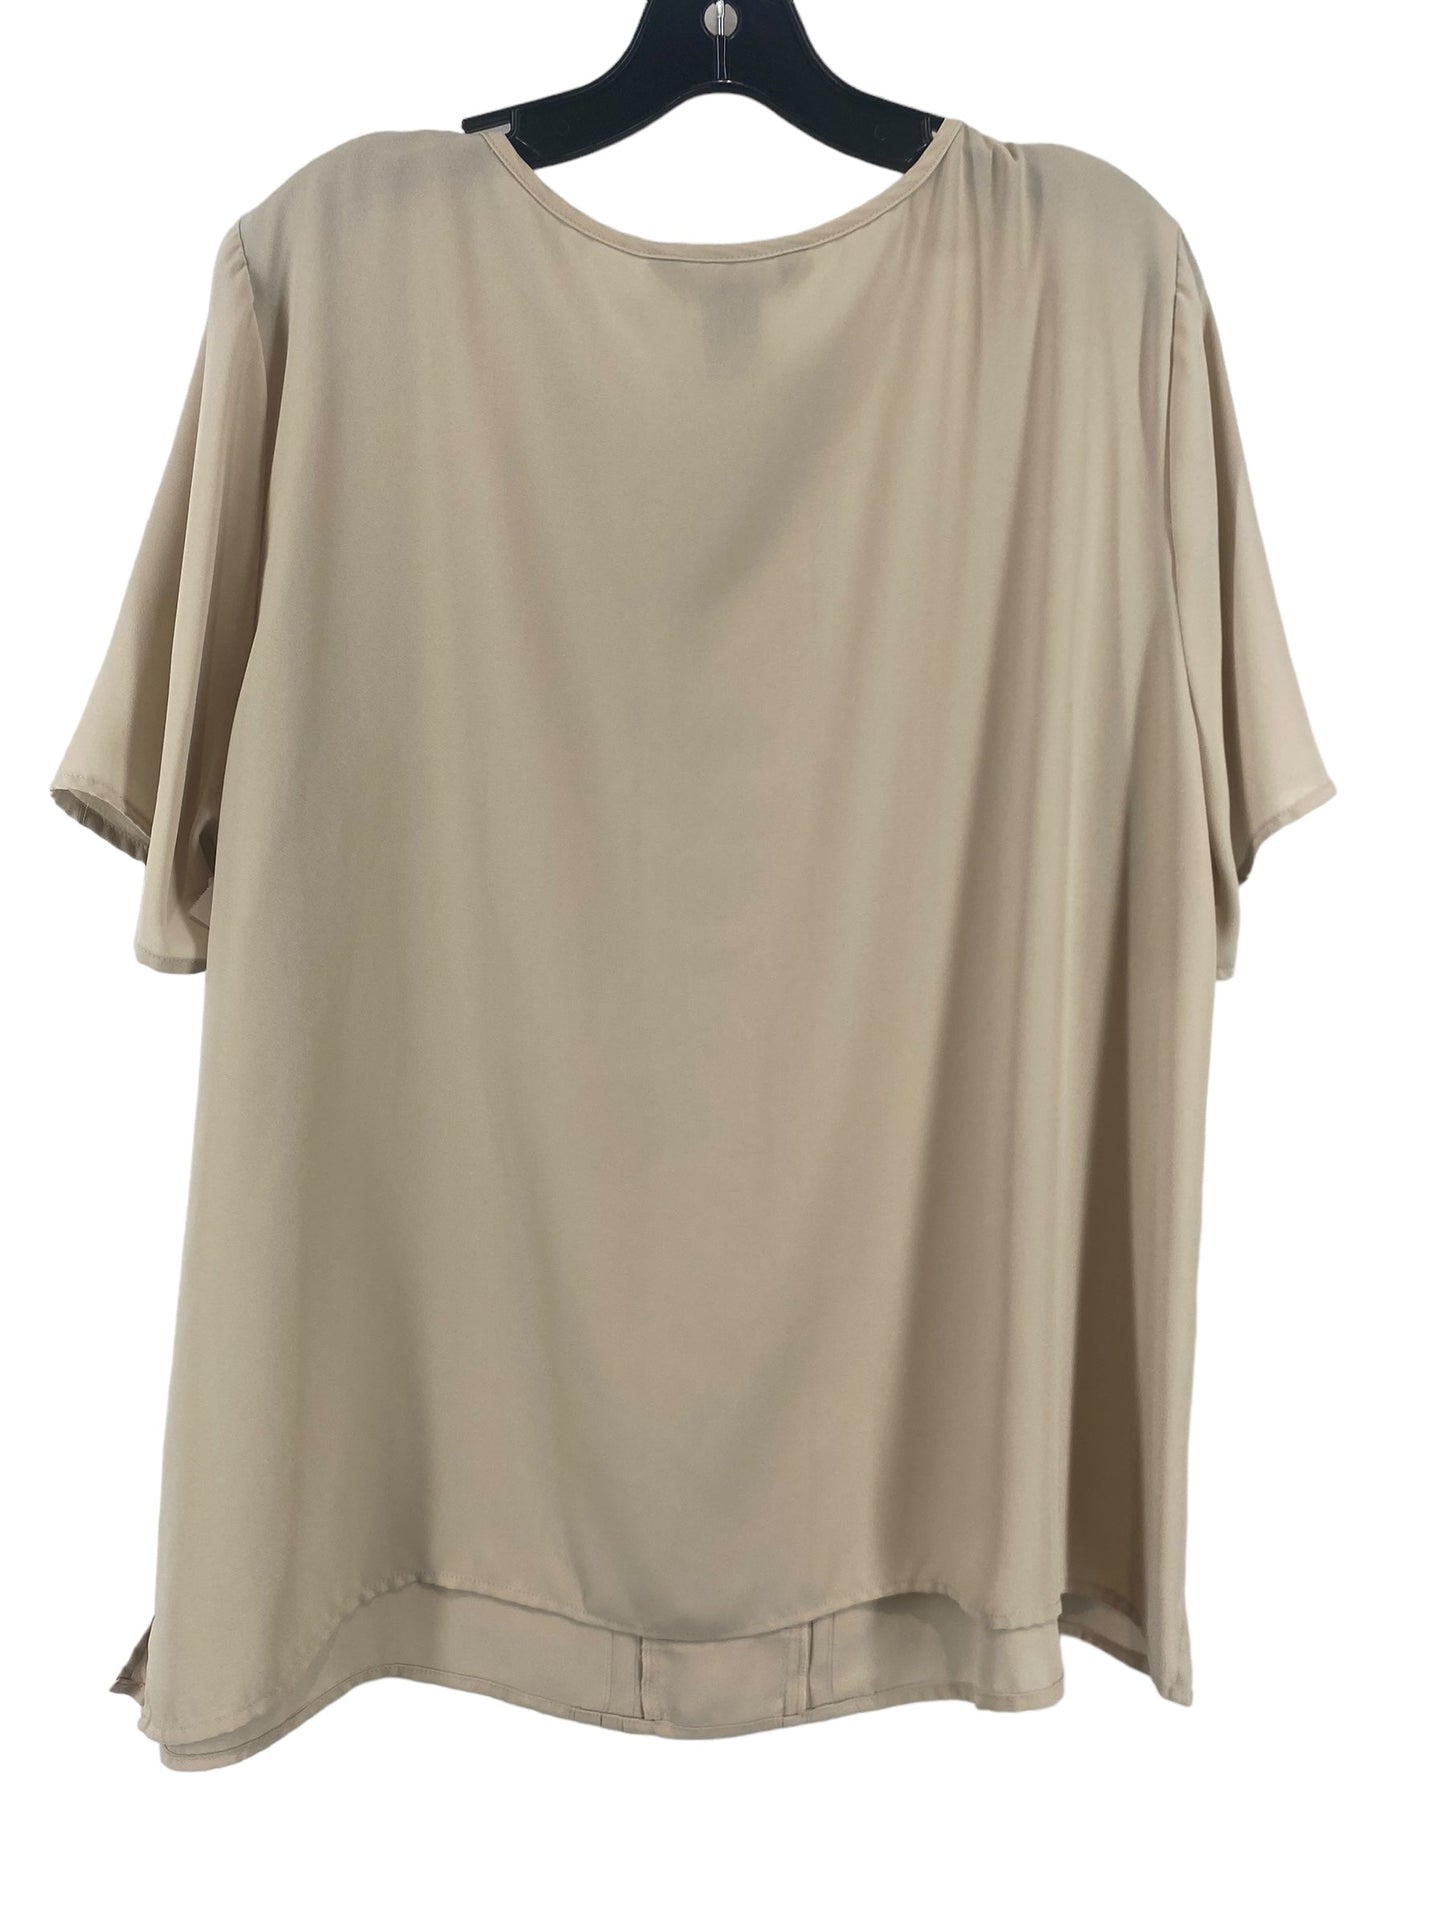 Tan Blouse Short Sleeve Investments, Size 1x